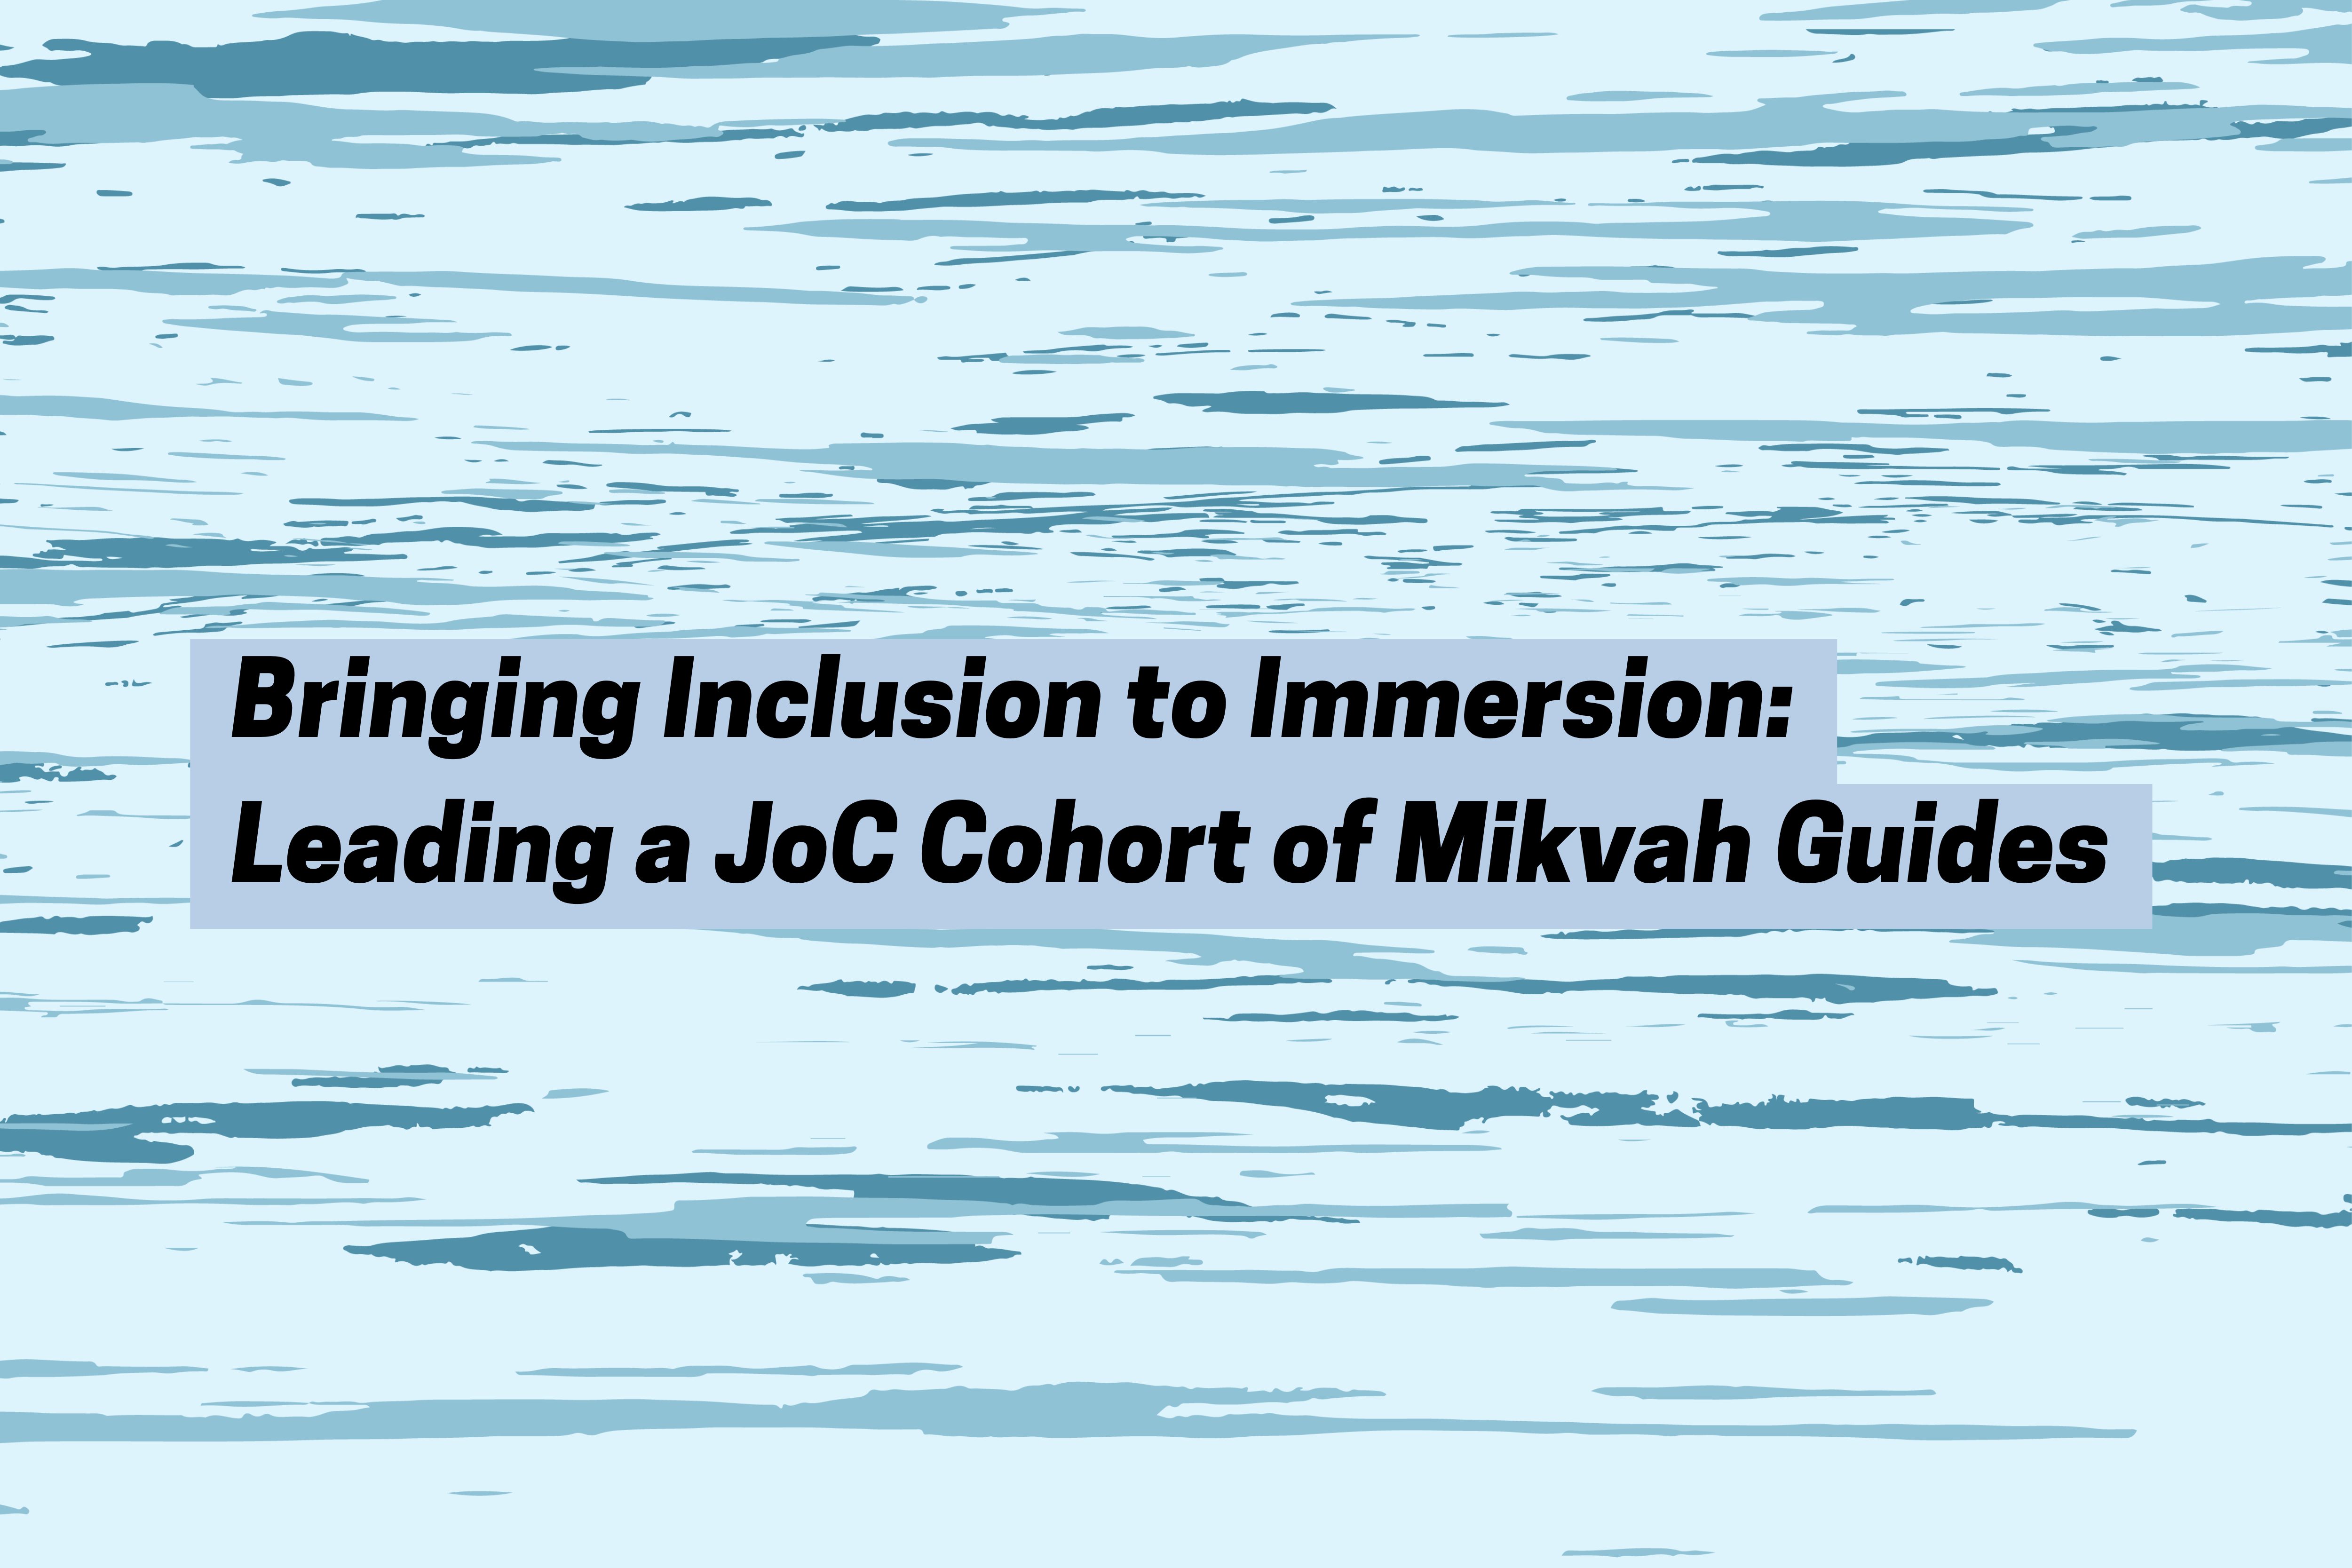 Bringing Inclusion to Immersion: Leading a JoC Cohort of Mikvah Guides; image shows a graphic of calm waters in cool blue tones